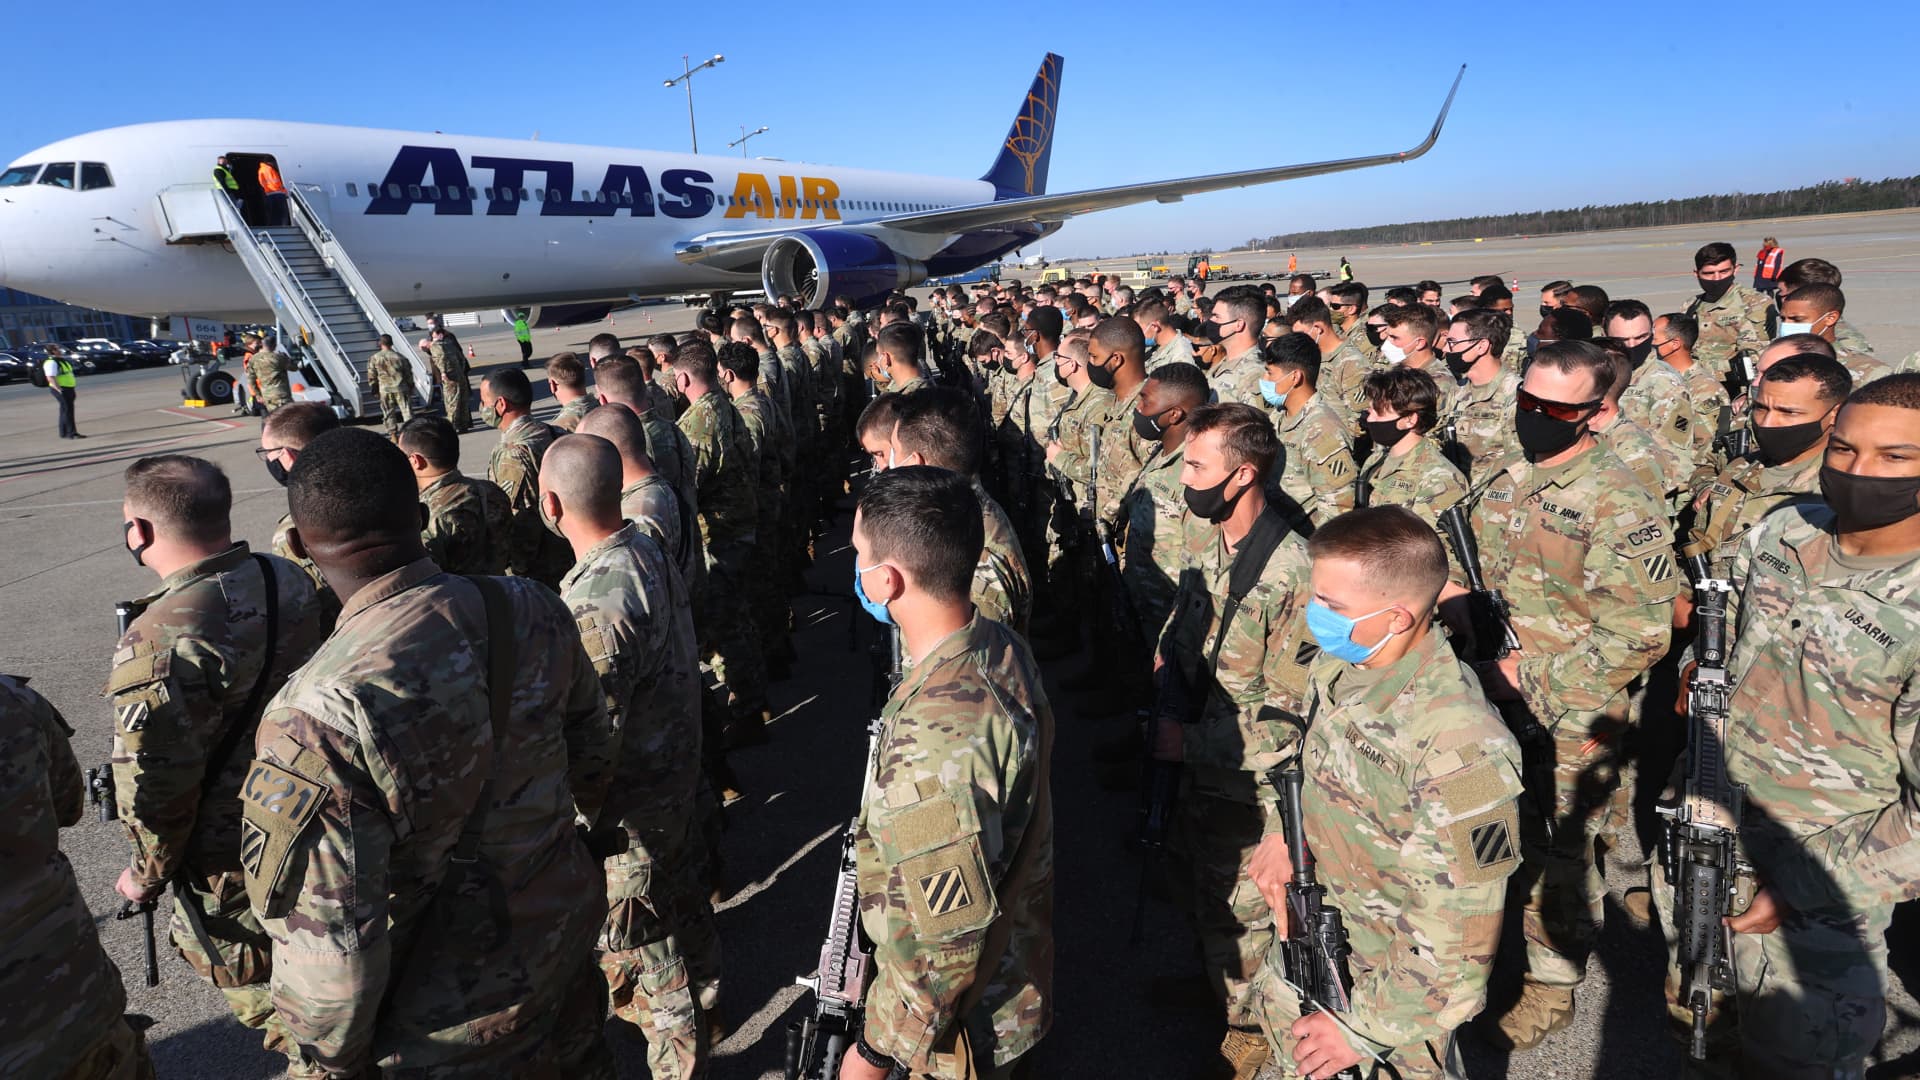 U.S. soldiers lined up at Albrecht Dürer Airport next to a Boeing 767-300 that has just landed.